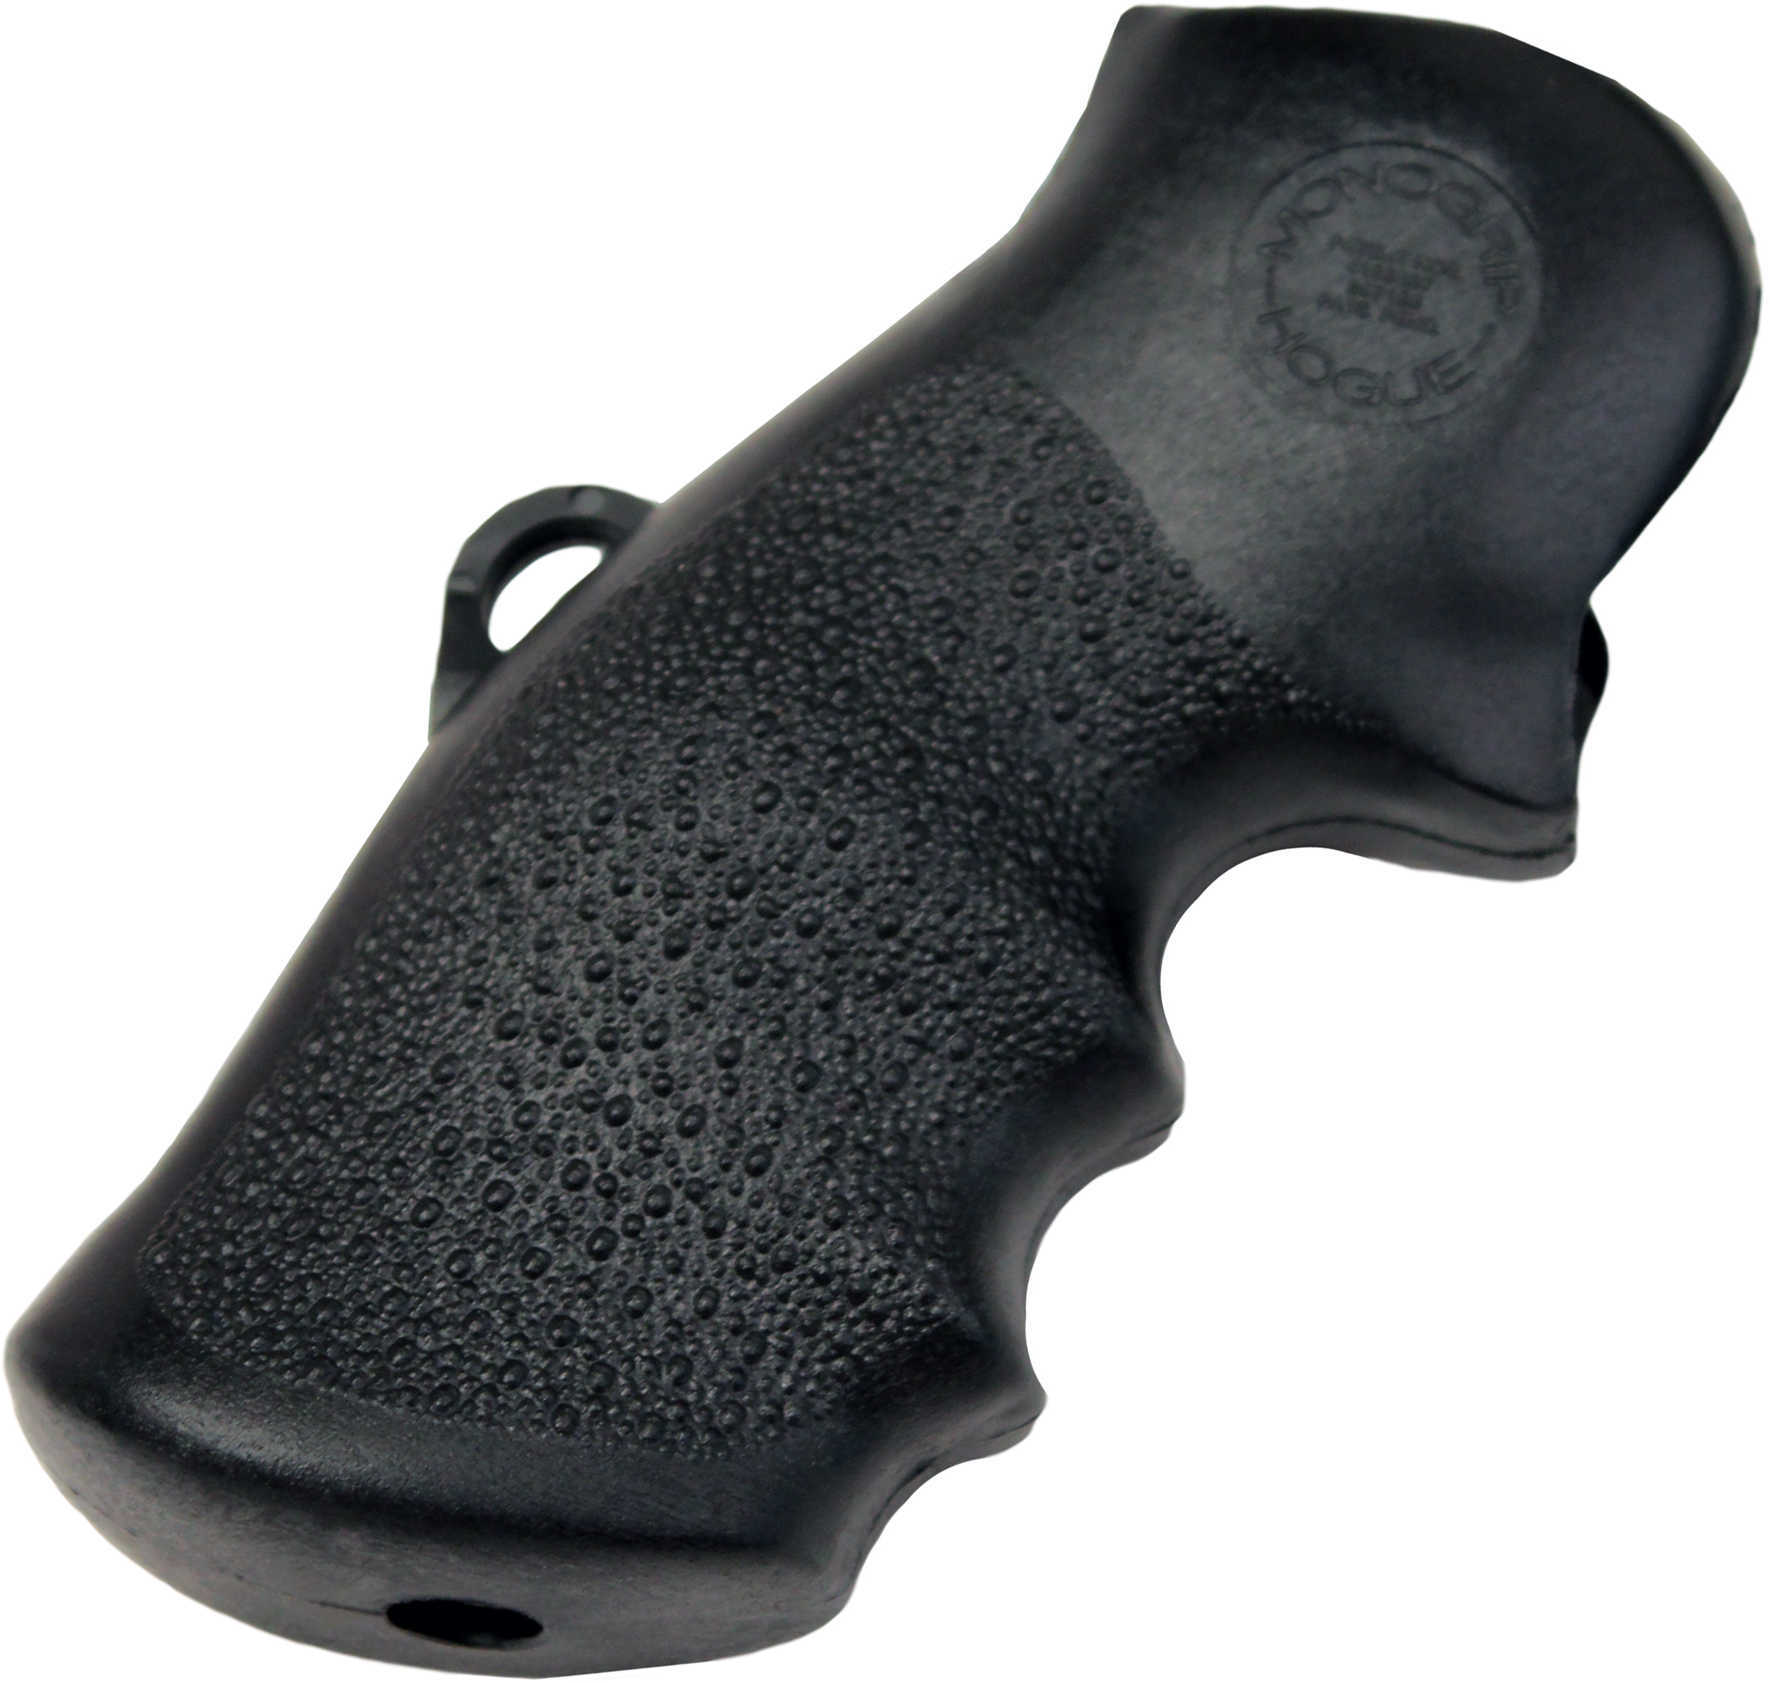 Hogue 10100 Monogrip with Finger Grooves Grip S&W K/L Frame w/Square Butt Nylon Black